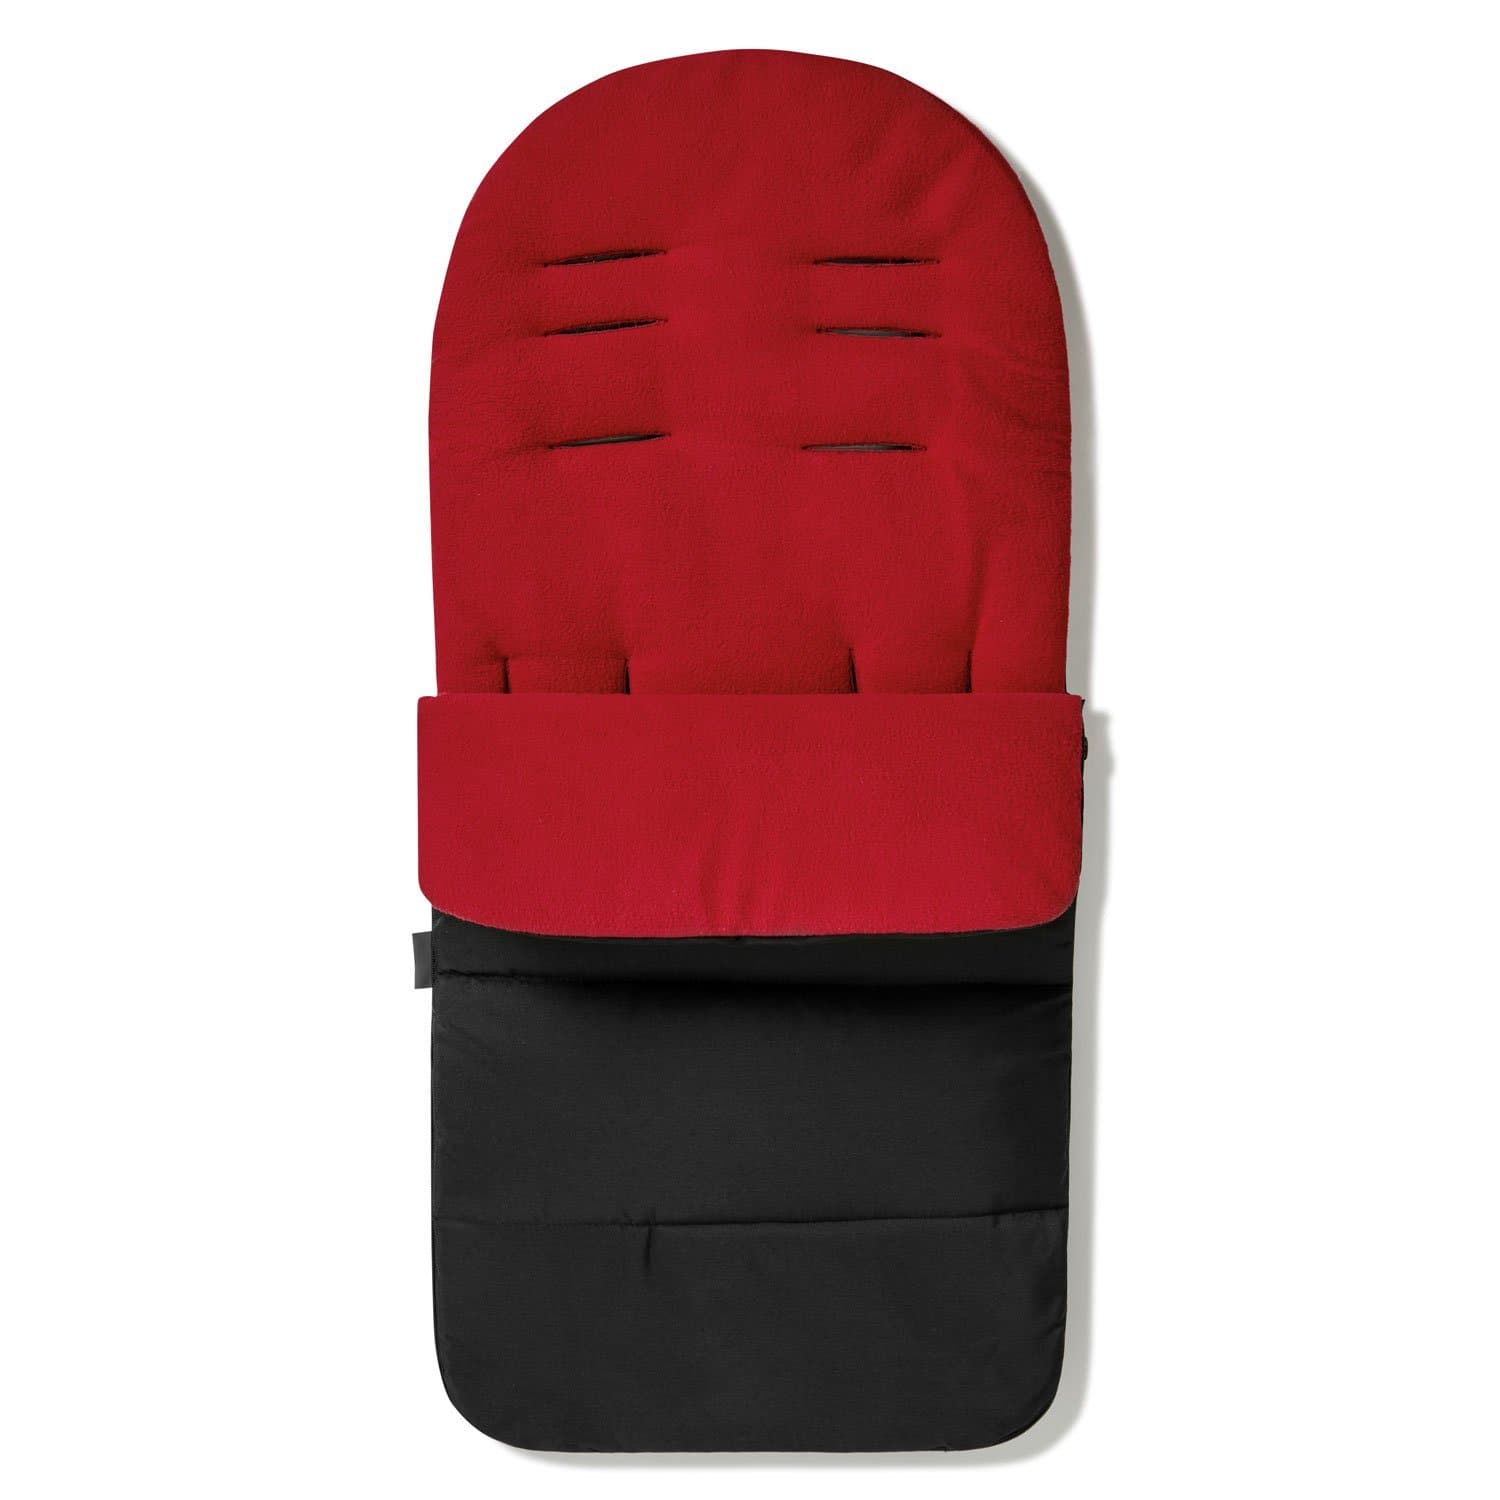 Premium Footmuff / Cosy Toes Compatible with Maclaren - For Your Little One